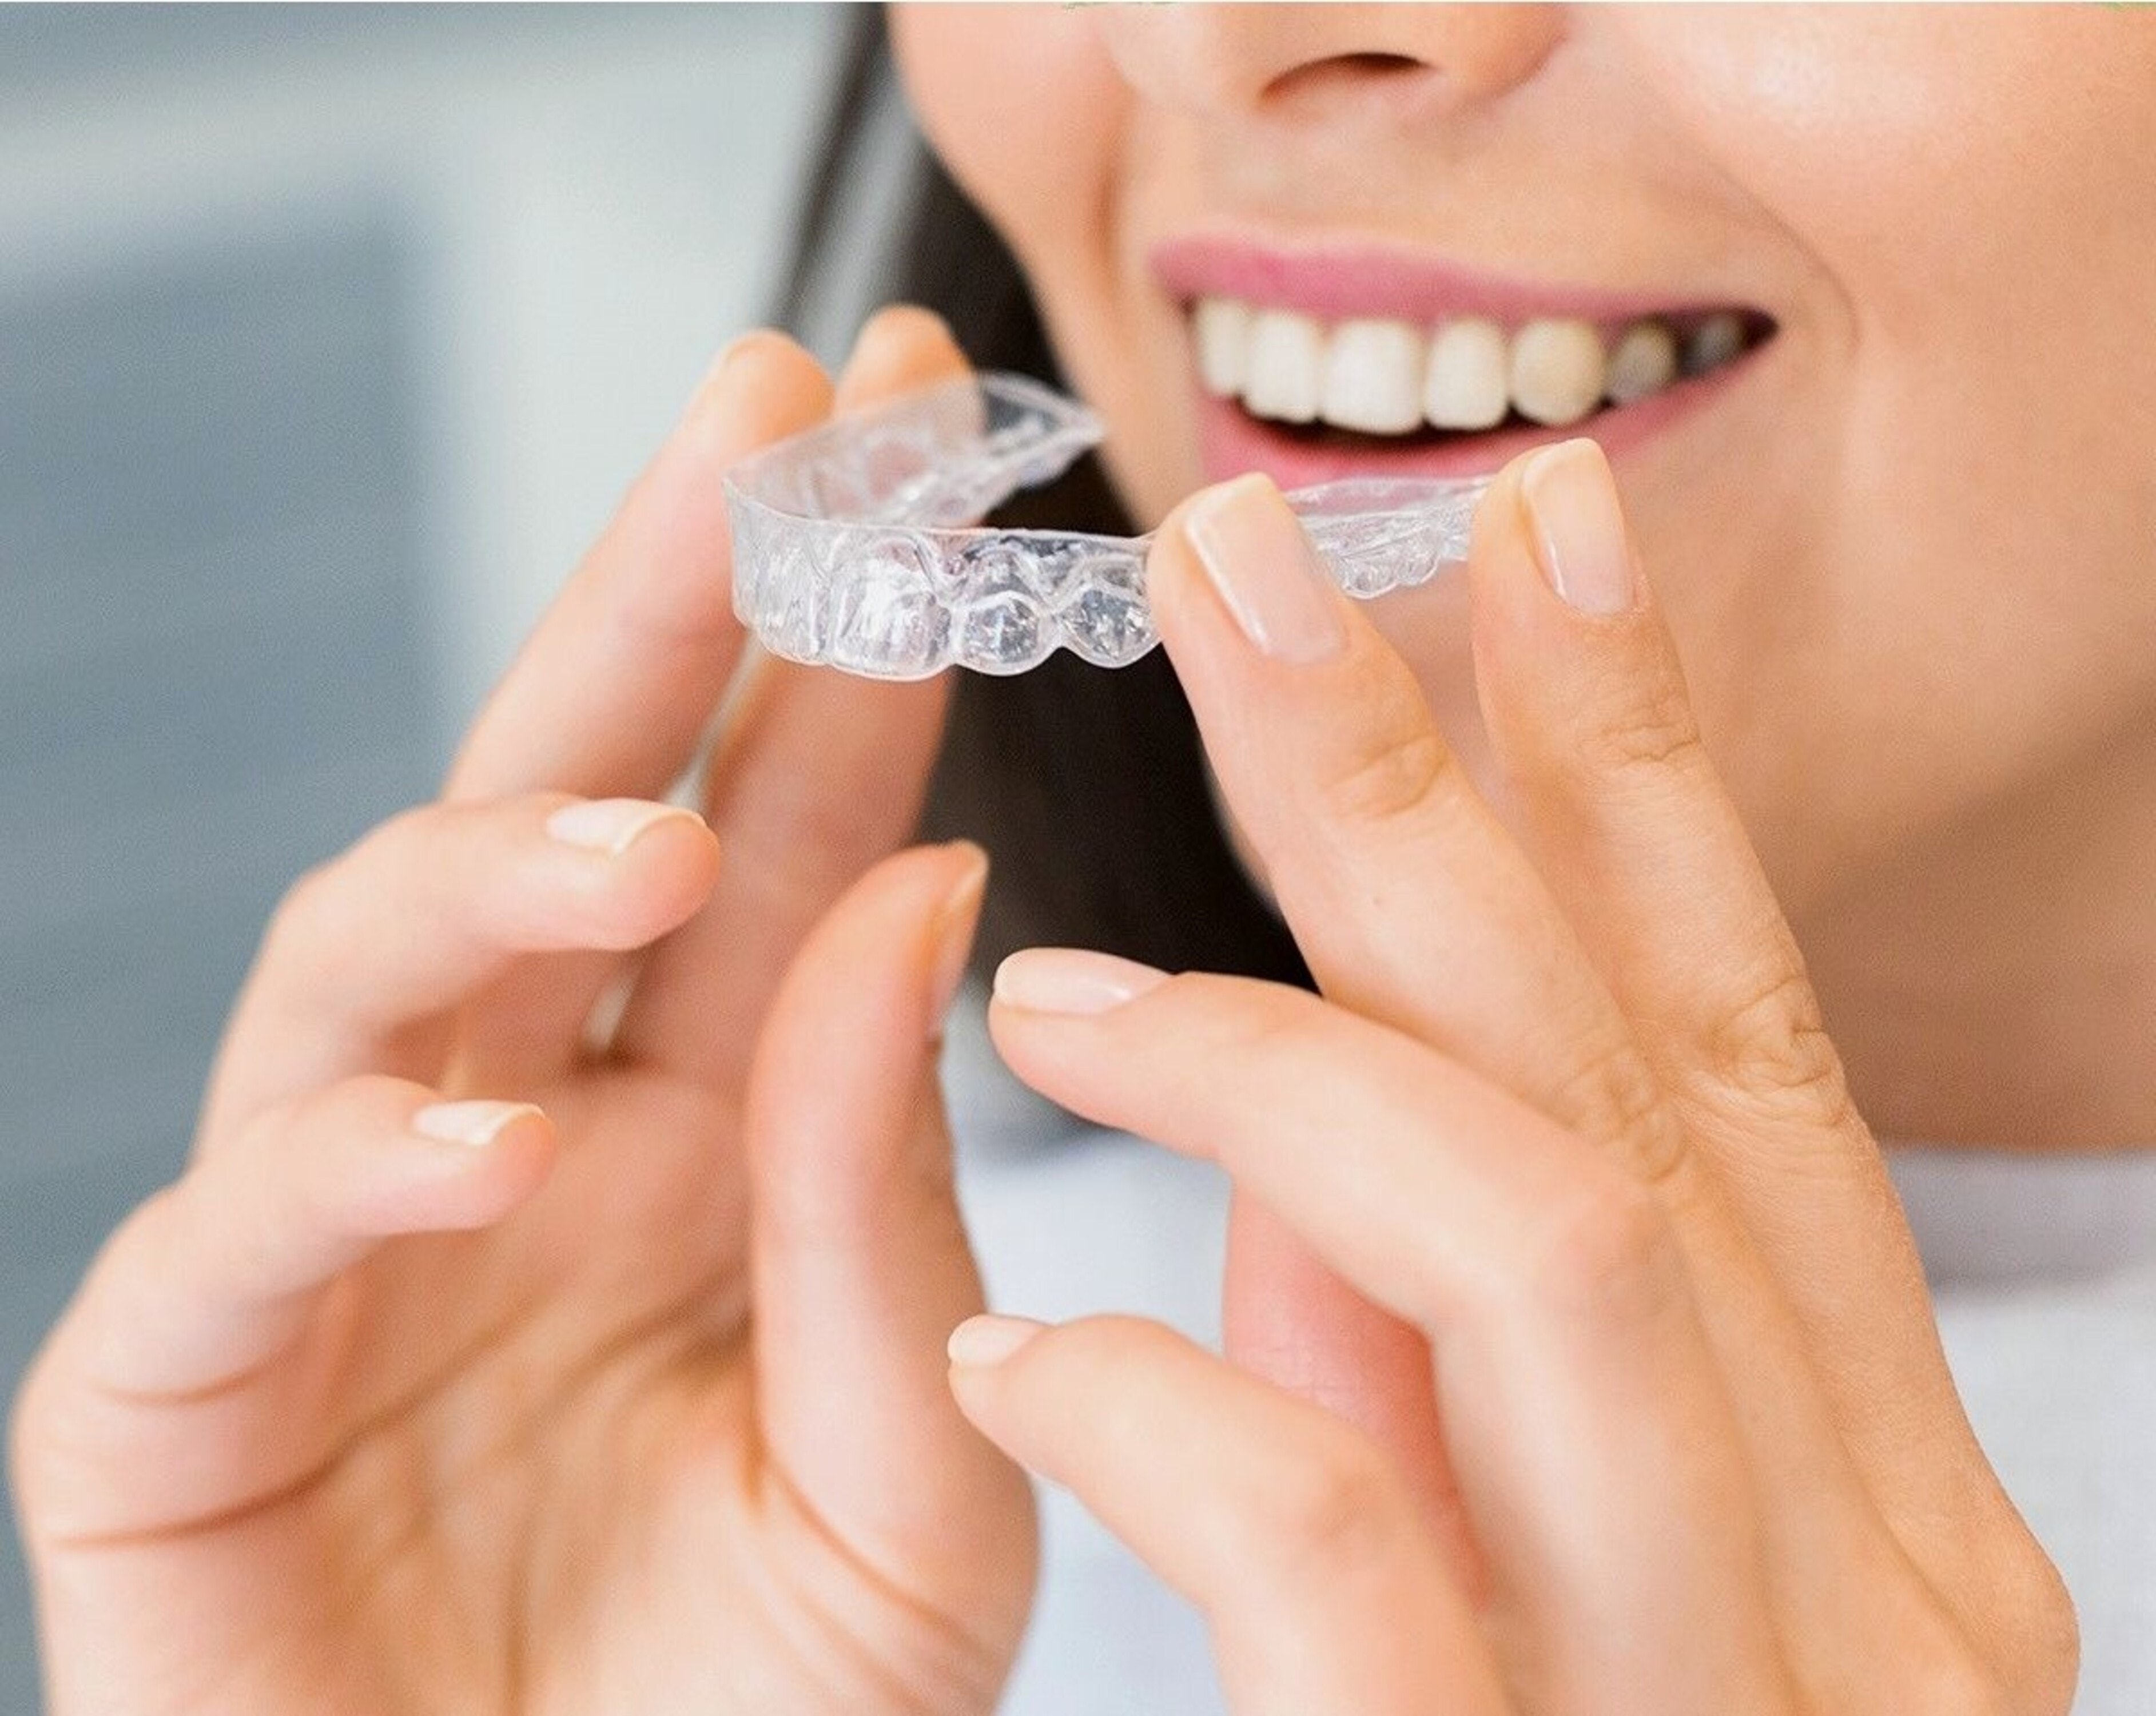 How to Care for Your Invisalign Trays